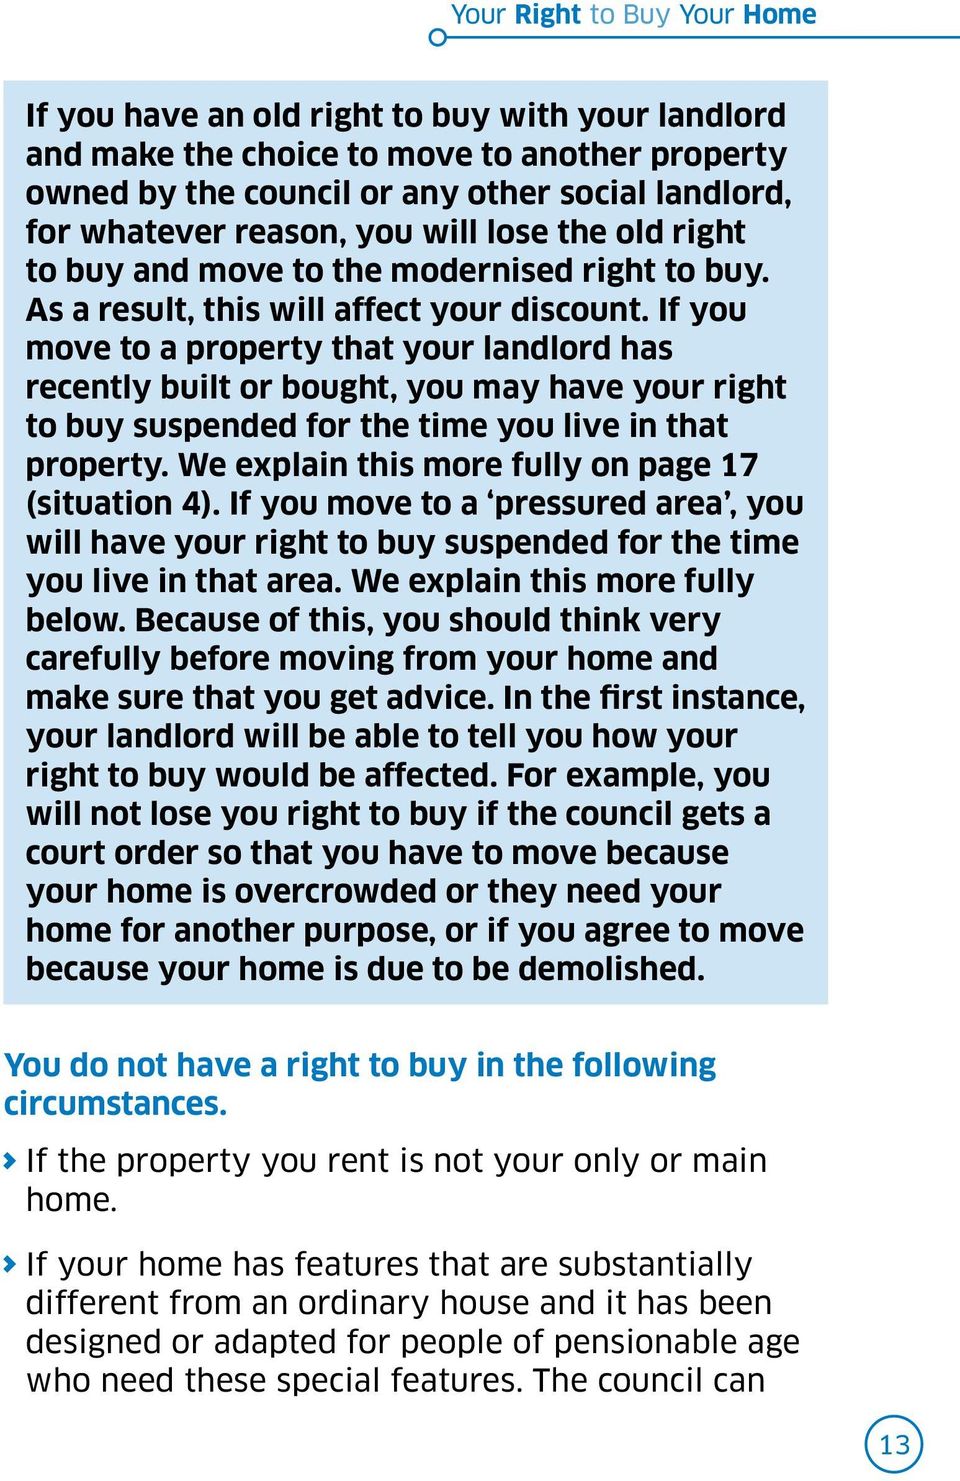 If you move to a property that your landlord has recently built or bought, you may have your right to buy suspended for the time you live in that property.